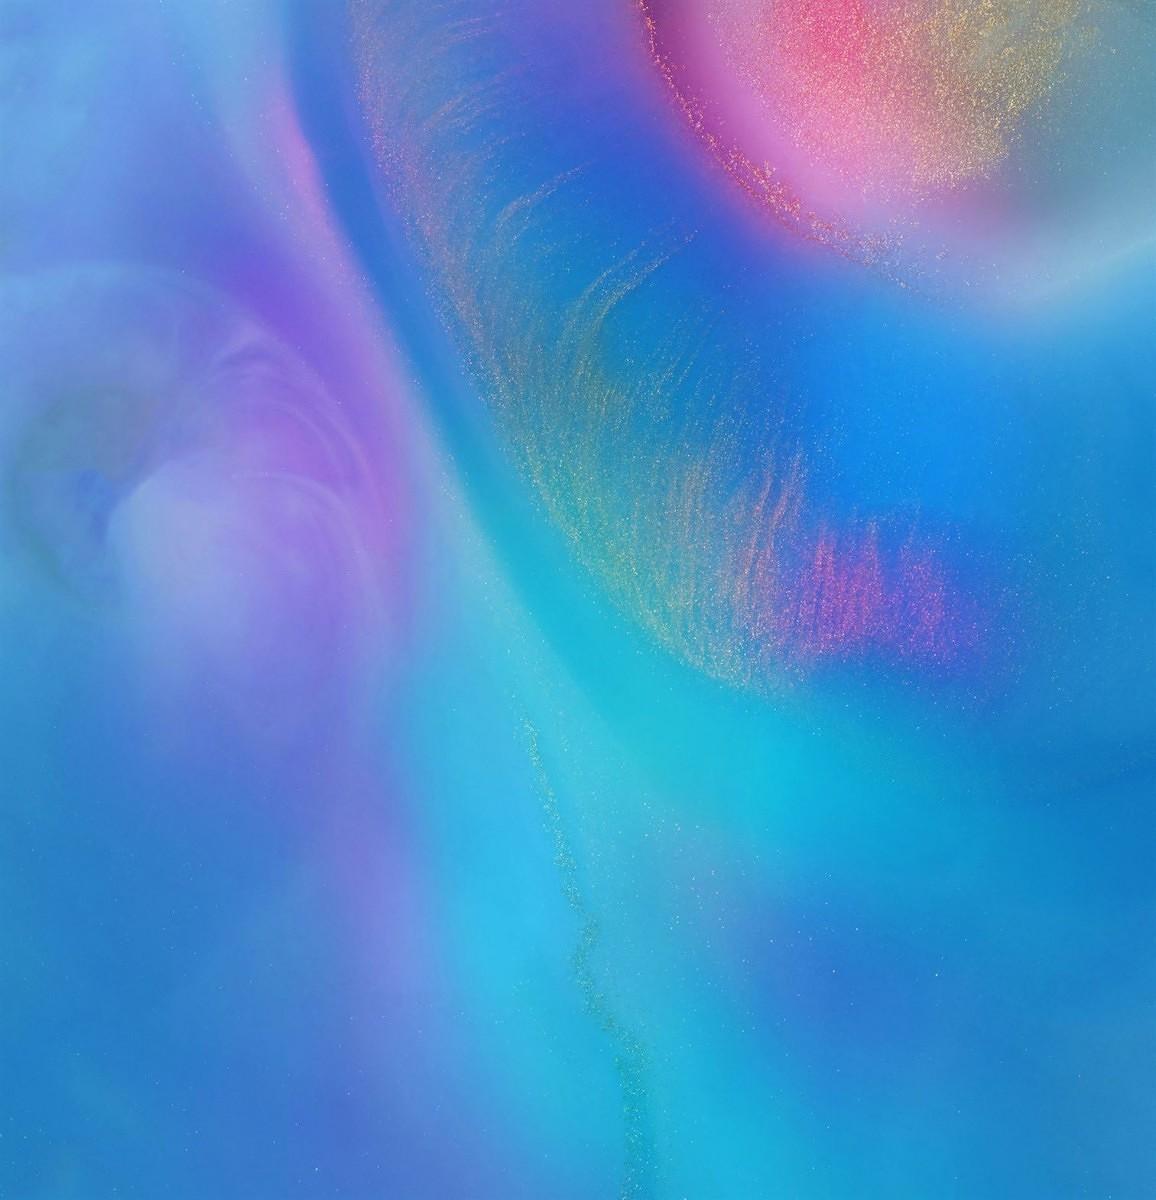 Download: Huawei Mate 20 Wallpapers, Live Wallpapers, and Themes